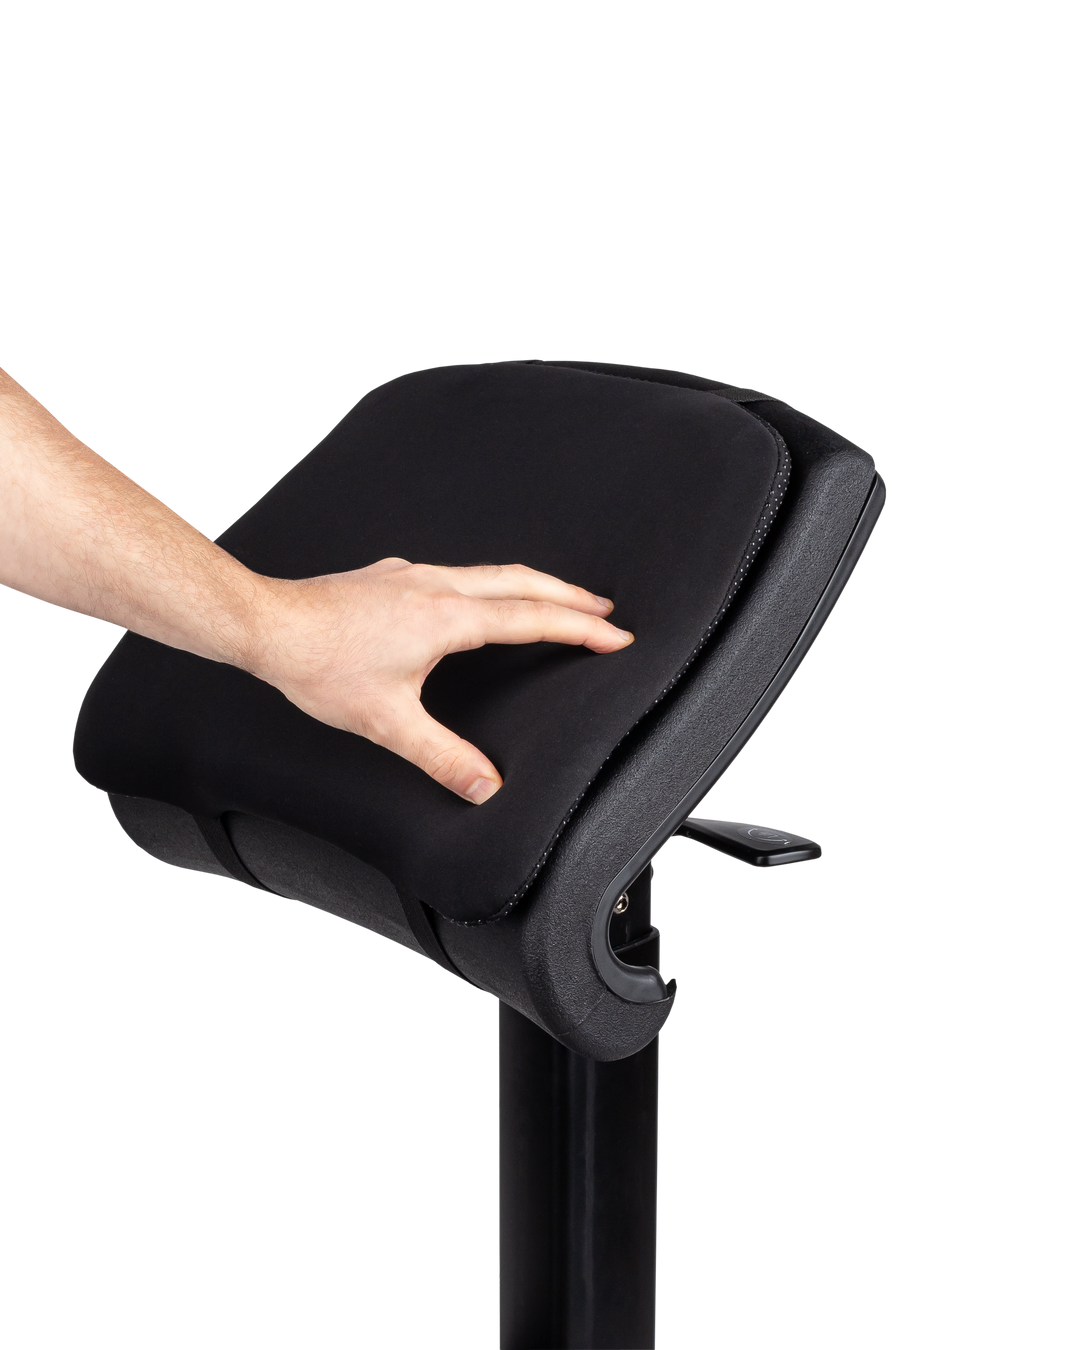 Best Standing Desk Chair for Leaning and Posture LeanRite Elite Ergonomic Back Pain Relief Includes Anti Fatigue Mat (Includes Xtra seat-Cushion)